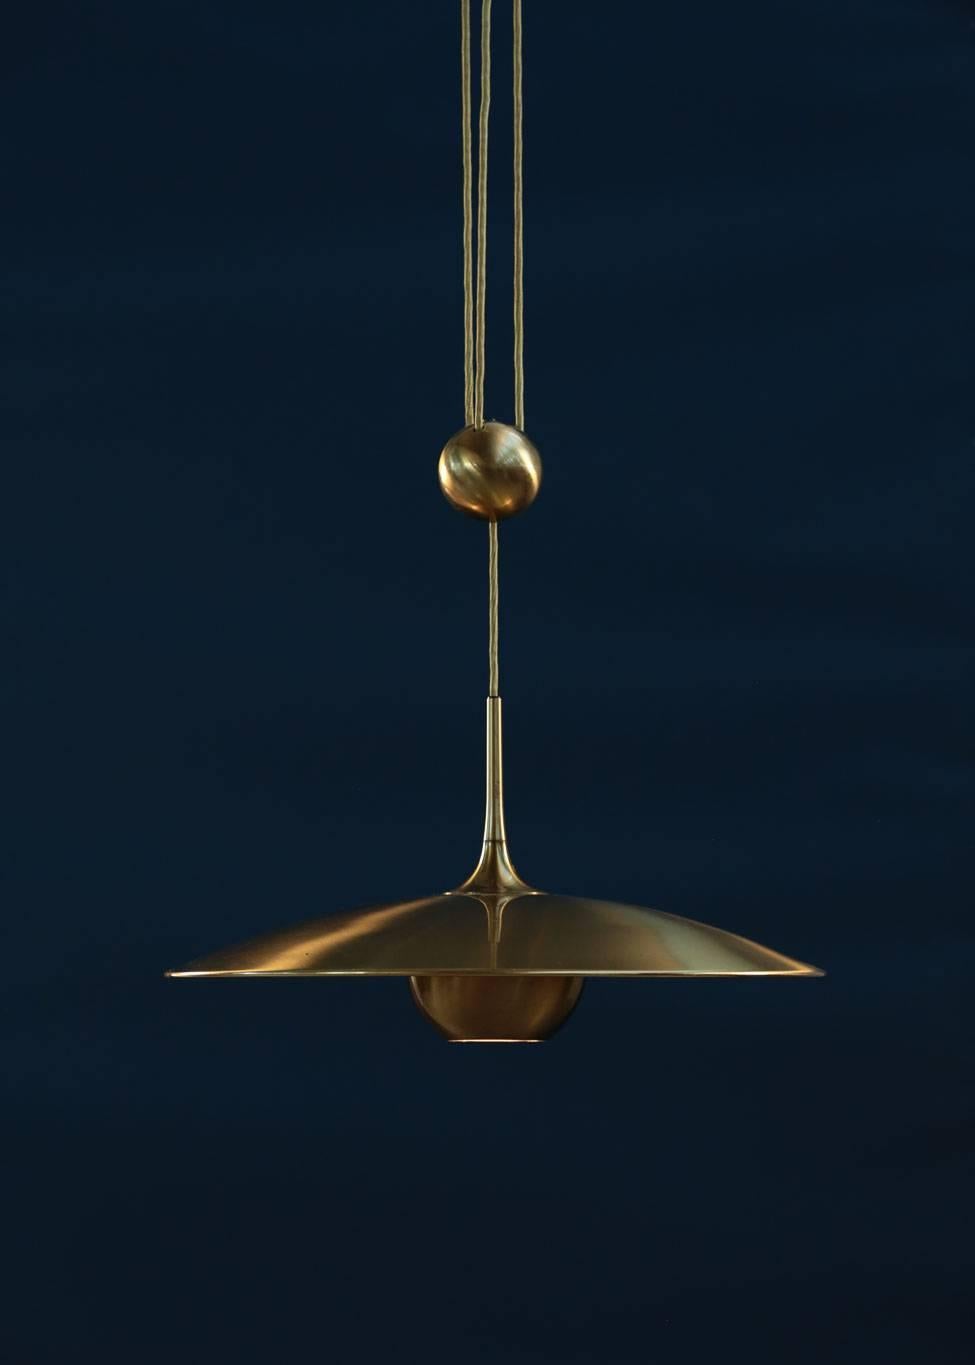 Excellent condition Florian Schulz pendant, Onos 55 made of brass hardware. Great patina to original brass.
Handsome counter-weight system.
Maximum height 200 cm.